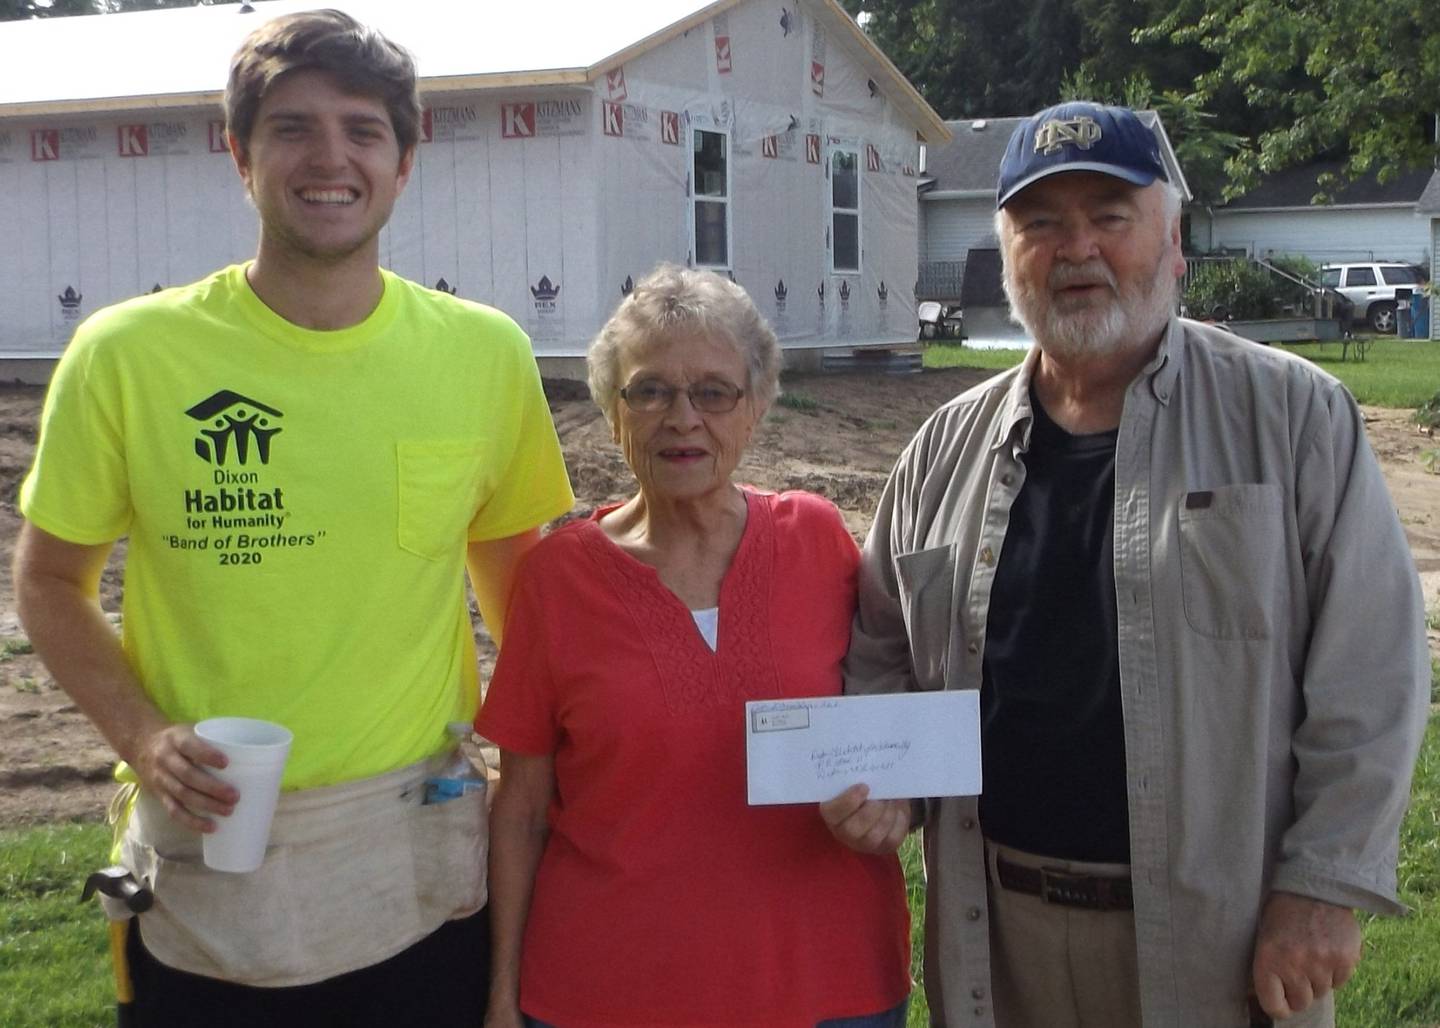 (Left to right); Dixon Habitat for Humanity volunteers Reagan Ballard and Jim Dixon receiving a $500 check donation from Dixon Lioness Club representative Gloria Schneider. The check will be put towards building this year's Habitat project.